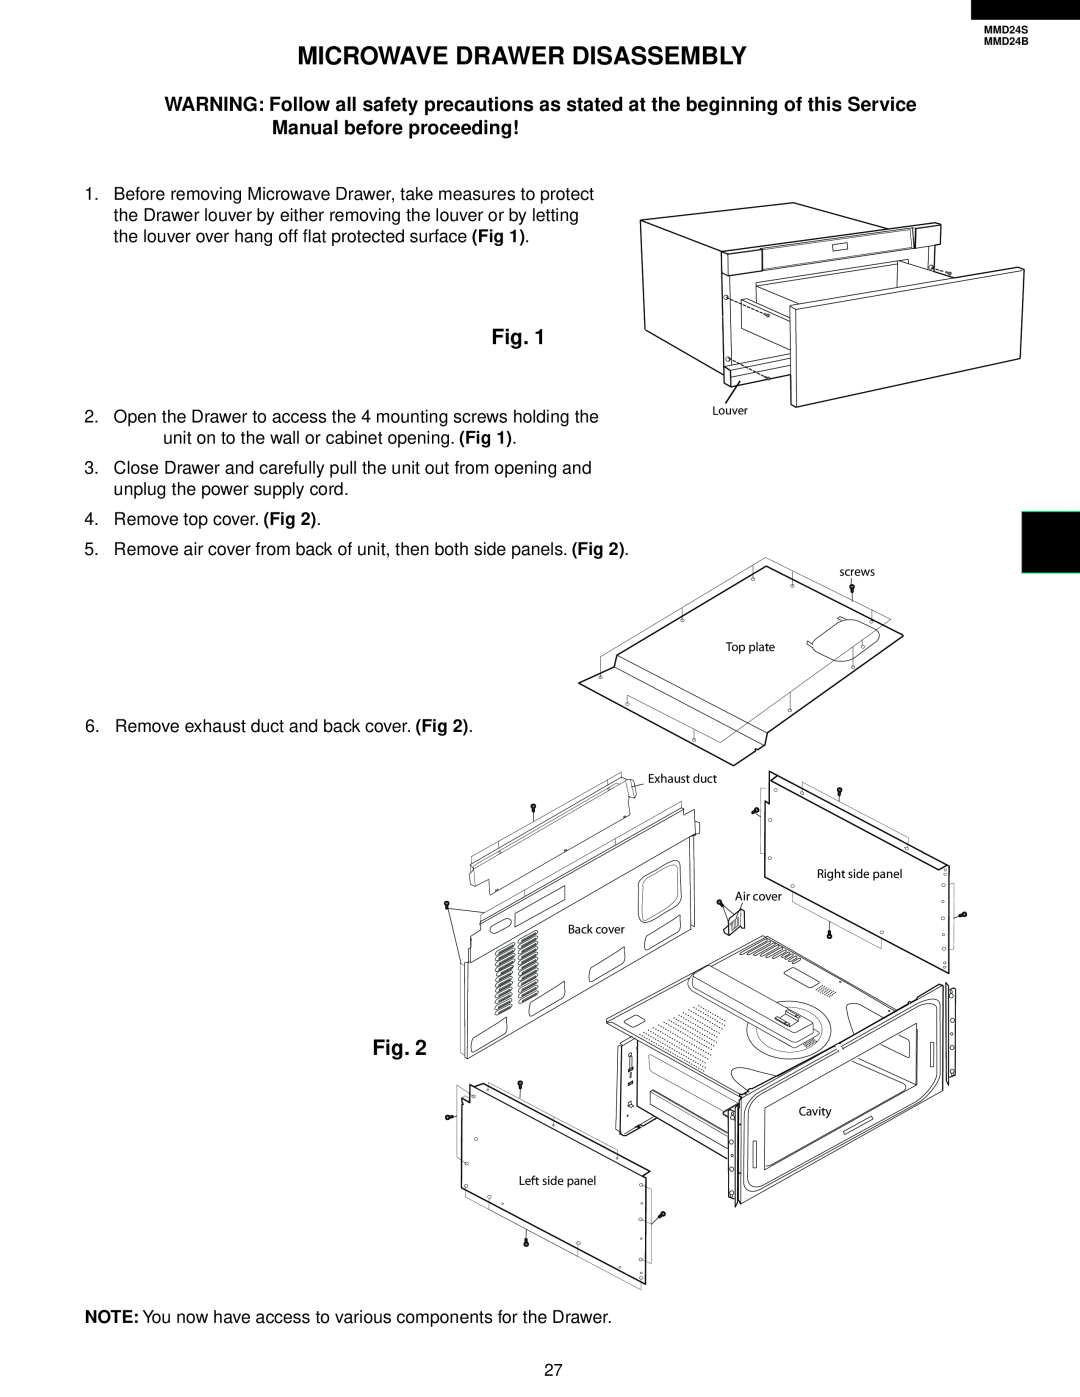 Sharp MMD24S, MMD24B manual Microwave Drawer Disassembly 